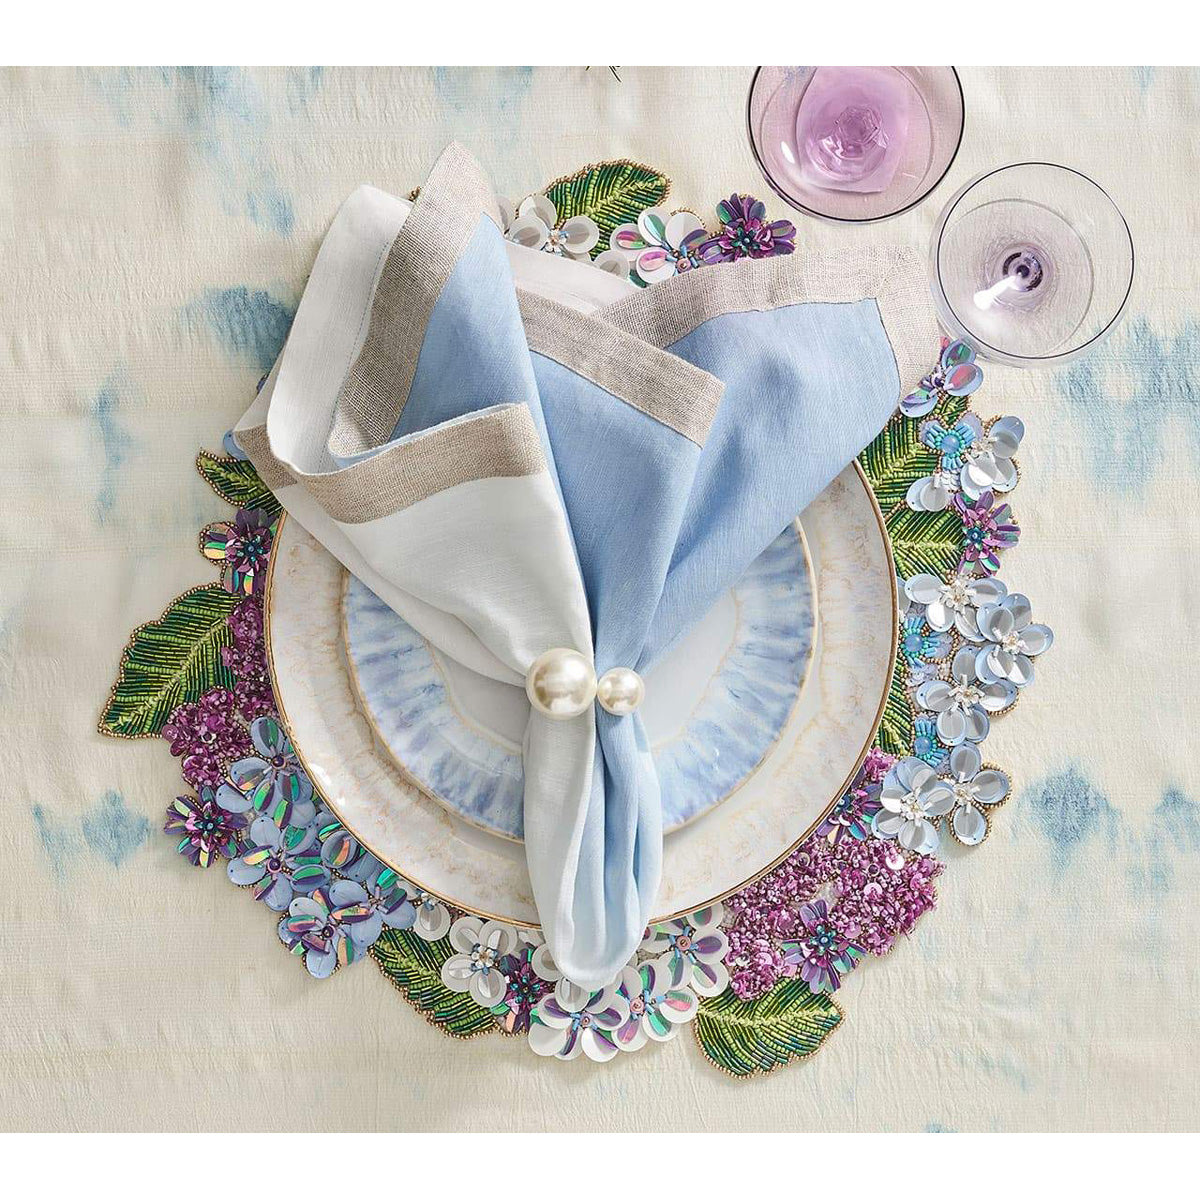 Hydrangea Placemat in Multi - Set of 2 by Kim Seybert Additional Image-3